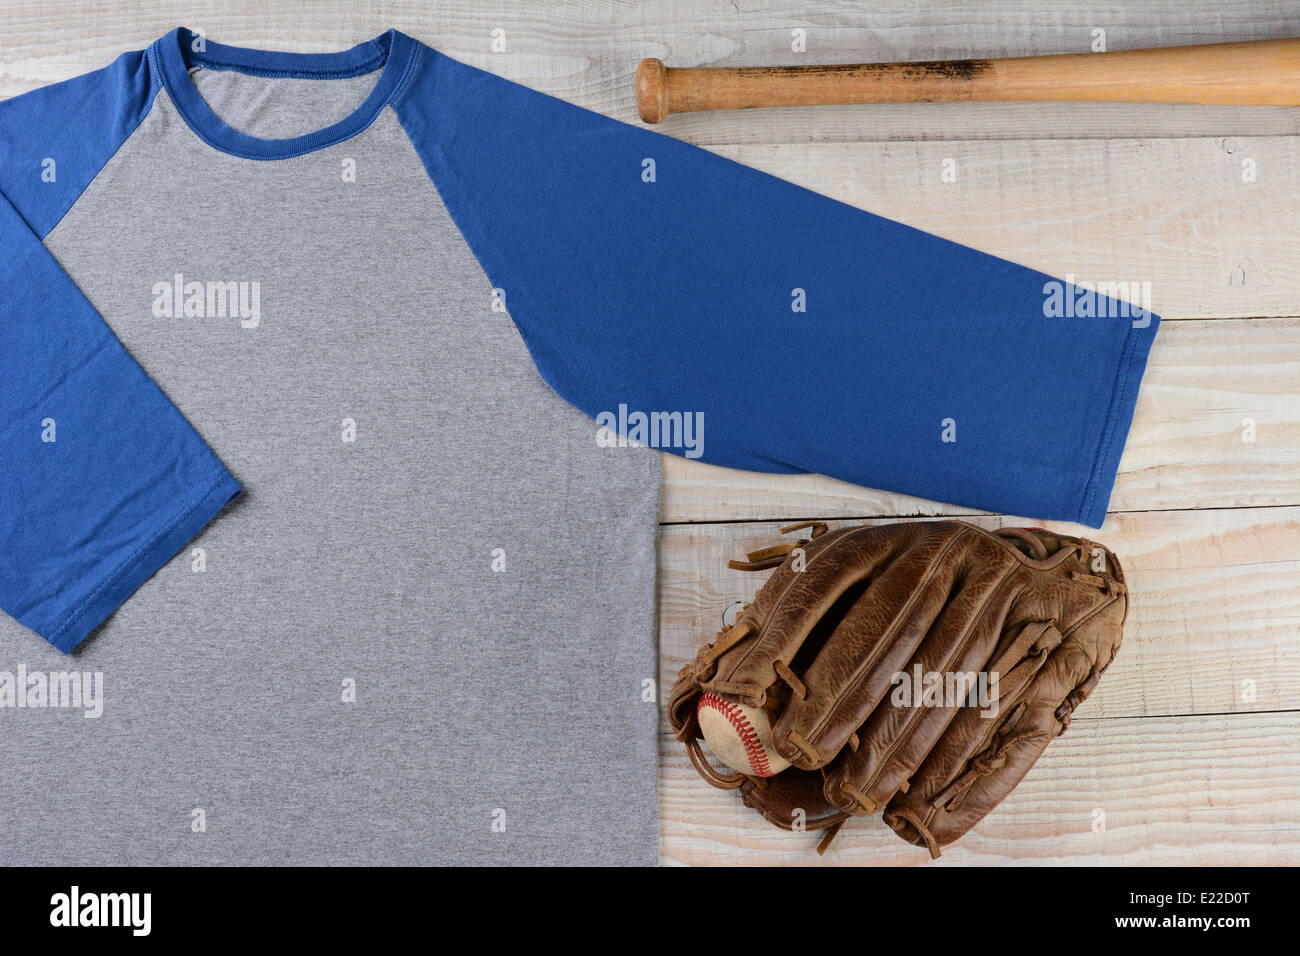 High angle shot of a Baseball jersey with a ball and glove and bat on wooden surface. Stock Photo